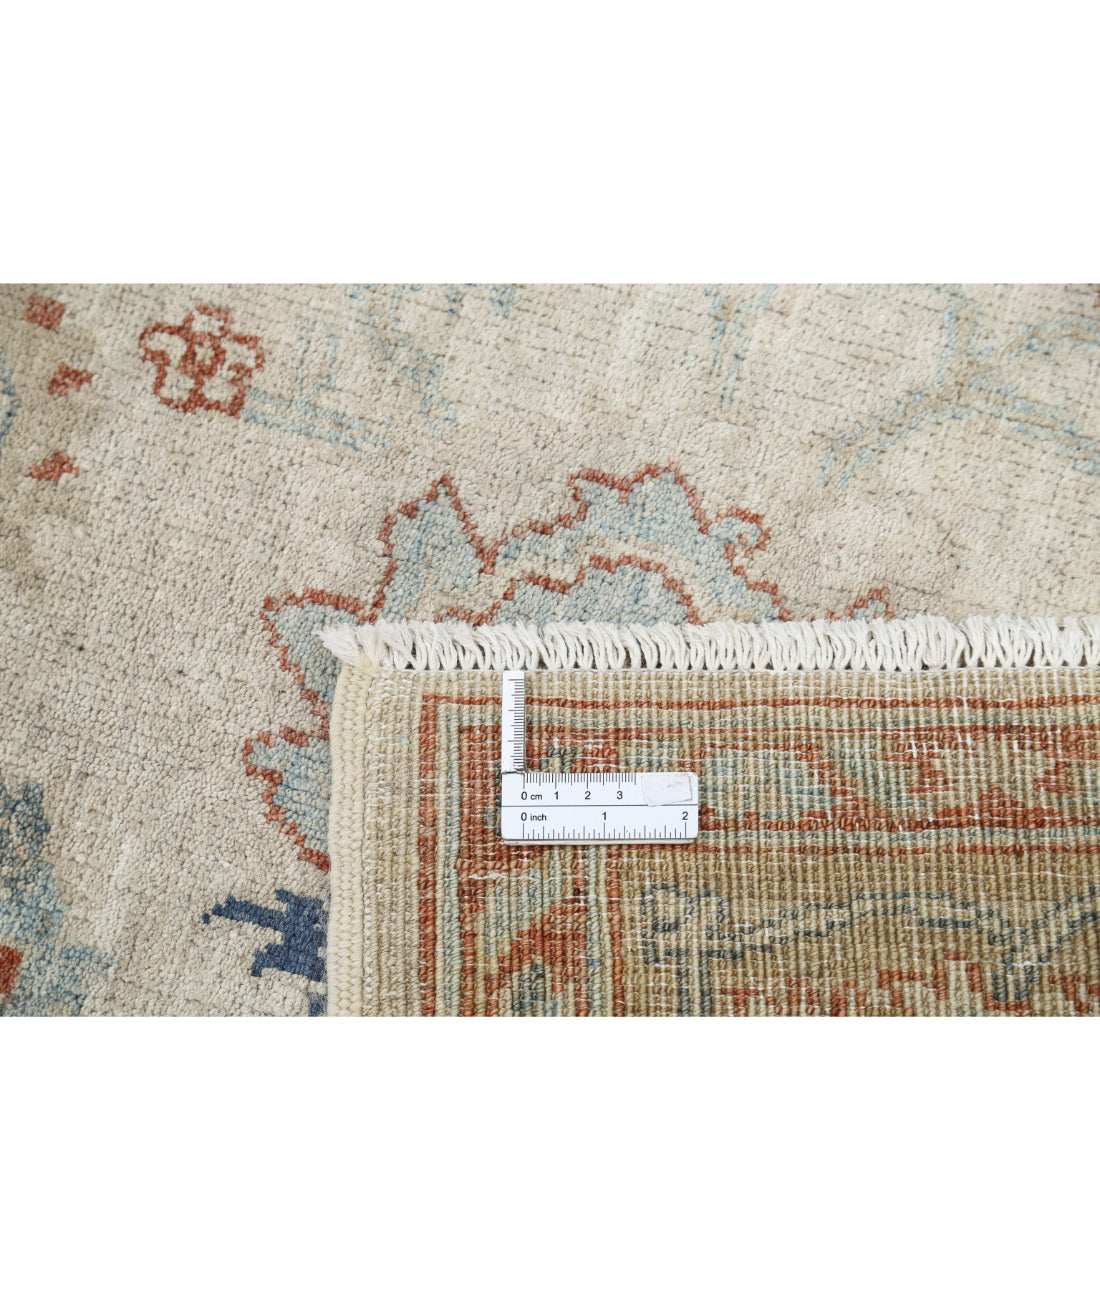 Hand Knotted Serenity Wool Rug - 6'1'' x 8'8'' 6'1'' x 8'8'' (183 X 260) / Ivory / Beige